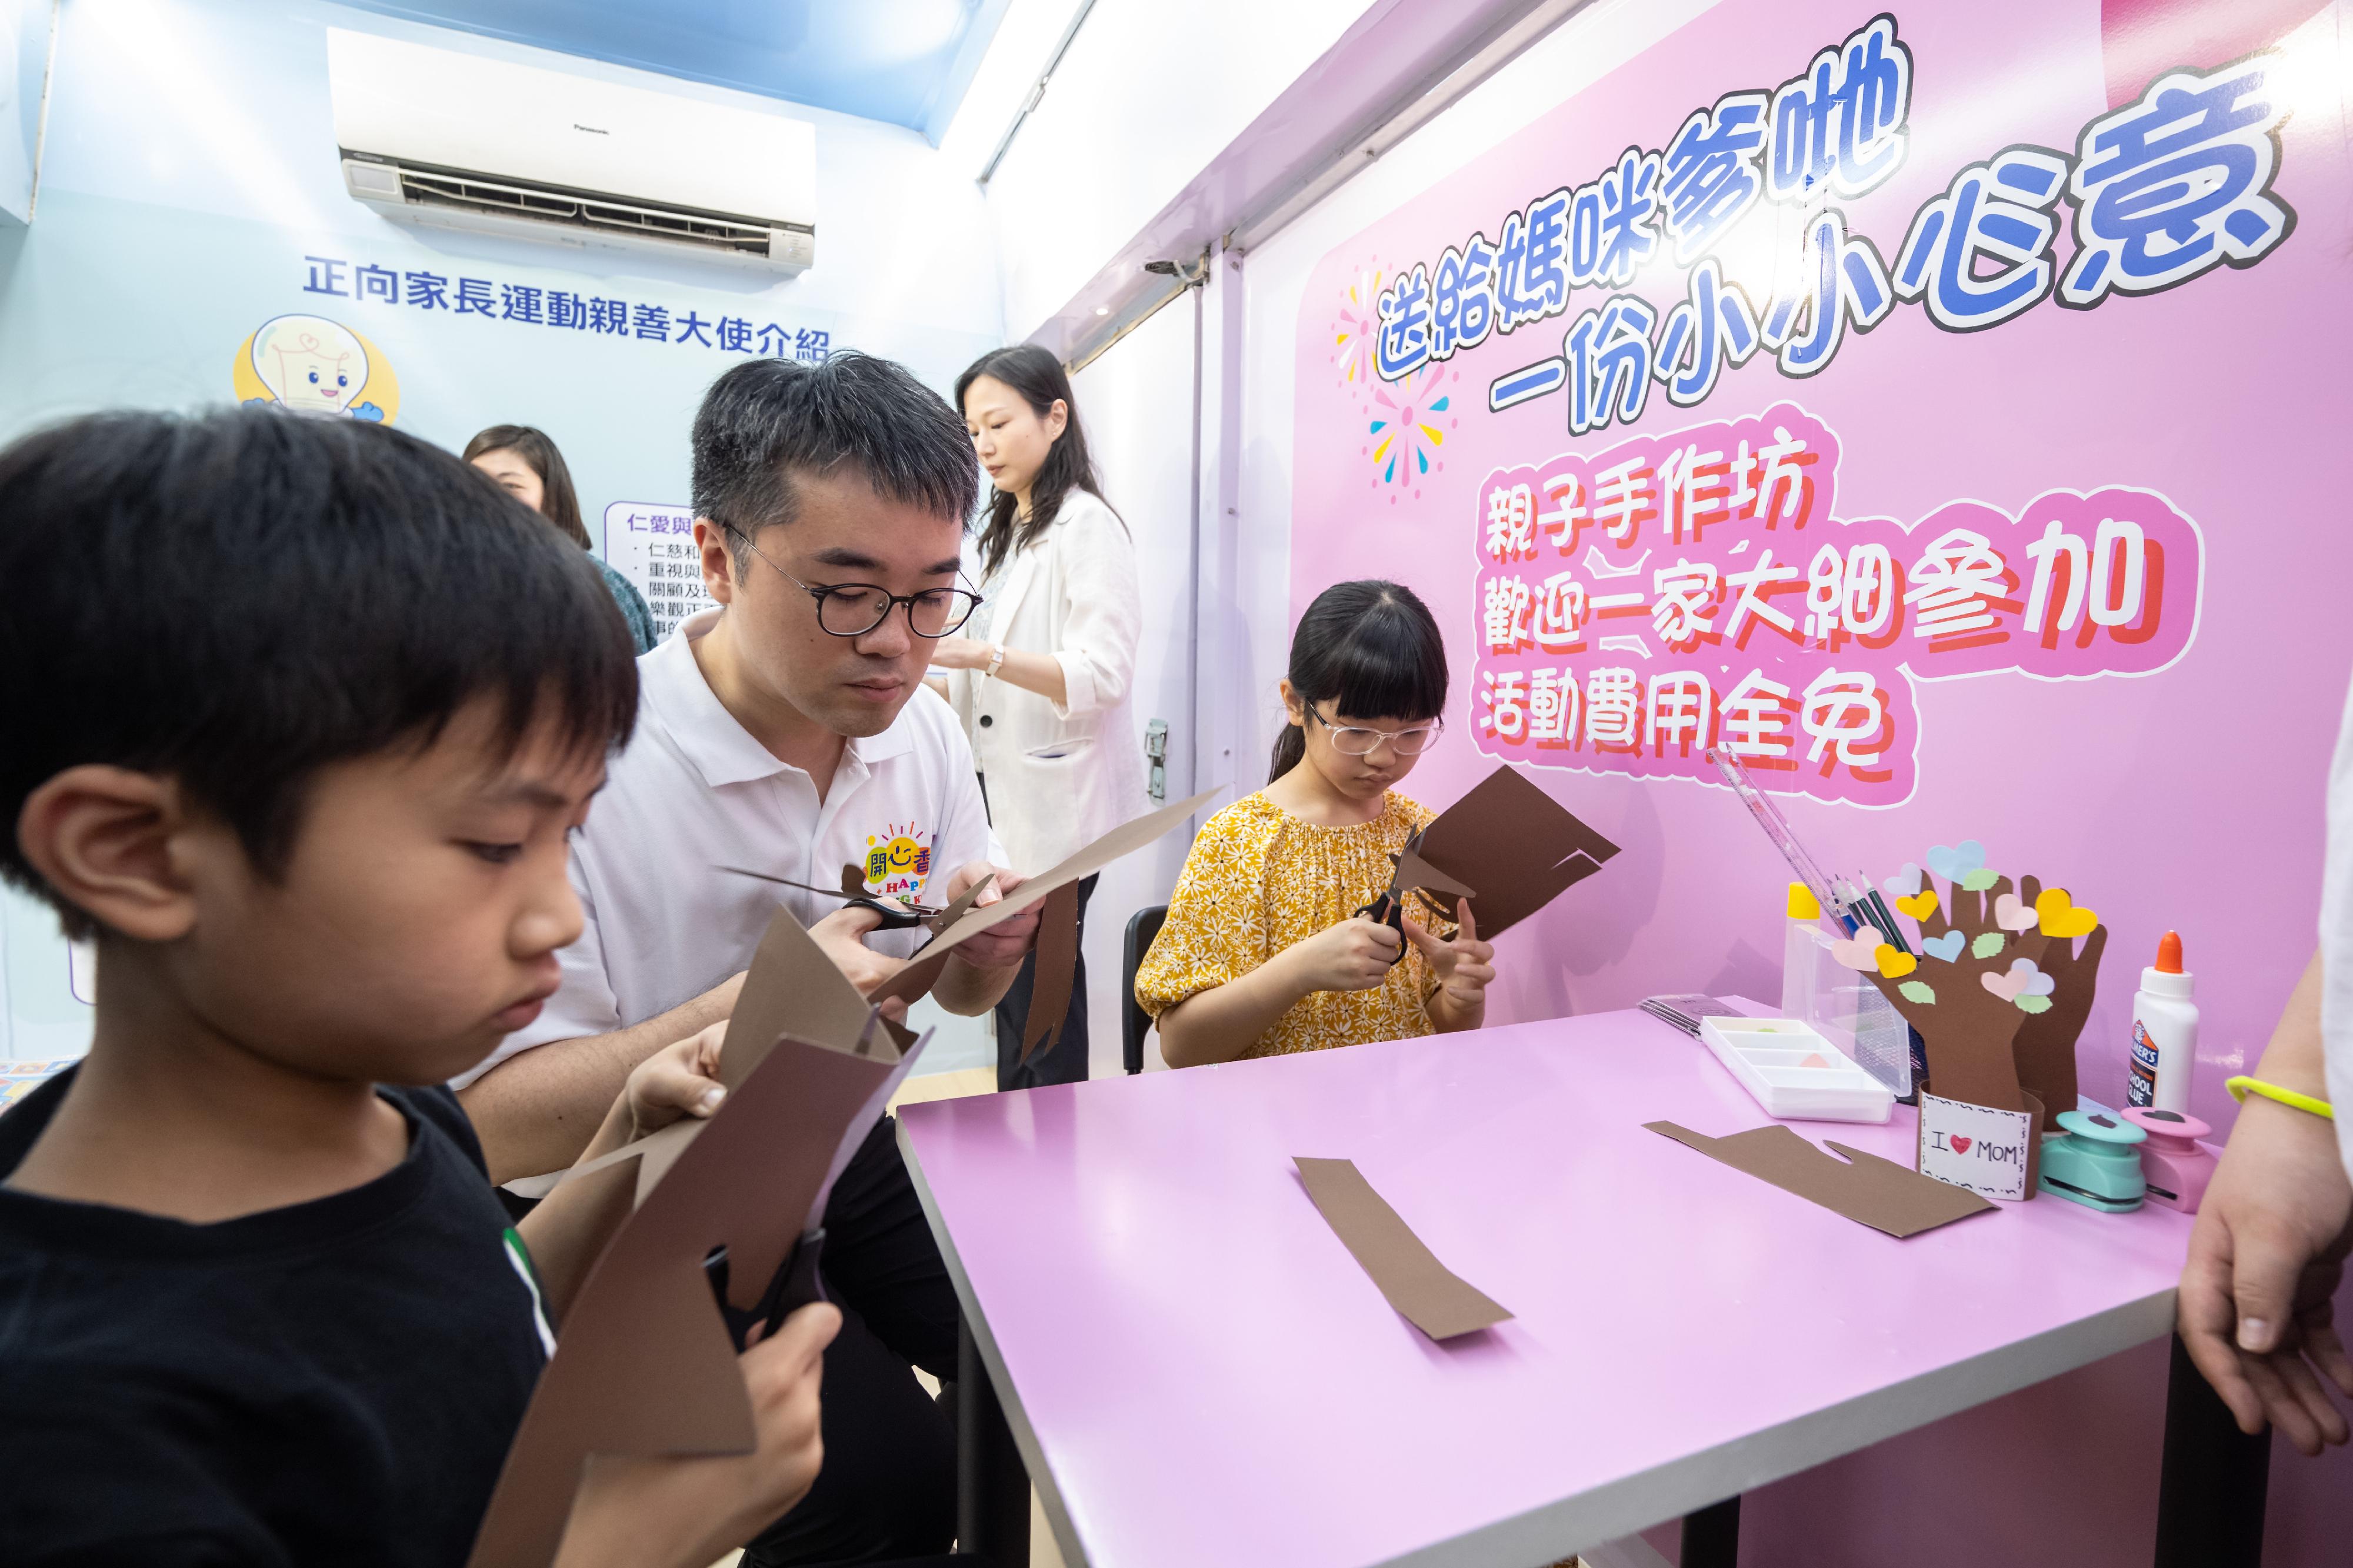 The Education Bureau has launched the "Show Gratitude and Appreciation - Support your Child with Love and Companionship" Moving Showroom to promote positive parent education to the public. Photo shows the Under Secretary for Education, Mr Sze Chun-fai (second left), participating in a parent-child workshop with members of the public at the moving showroom today (May 13).